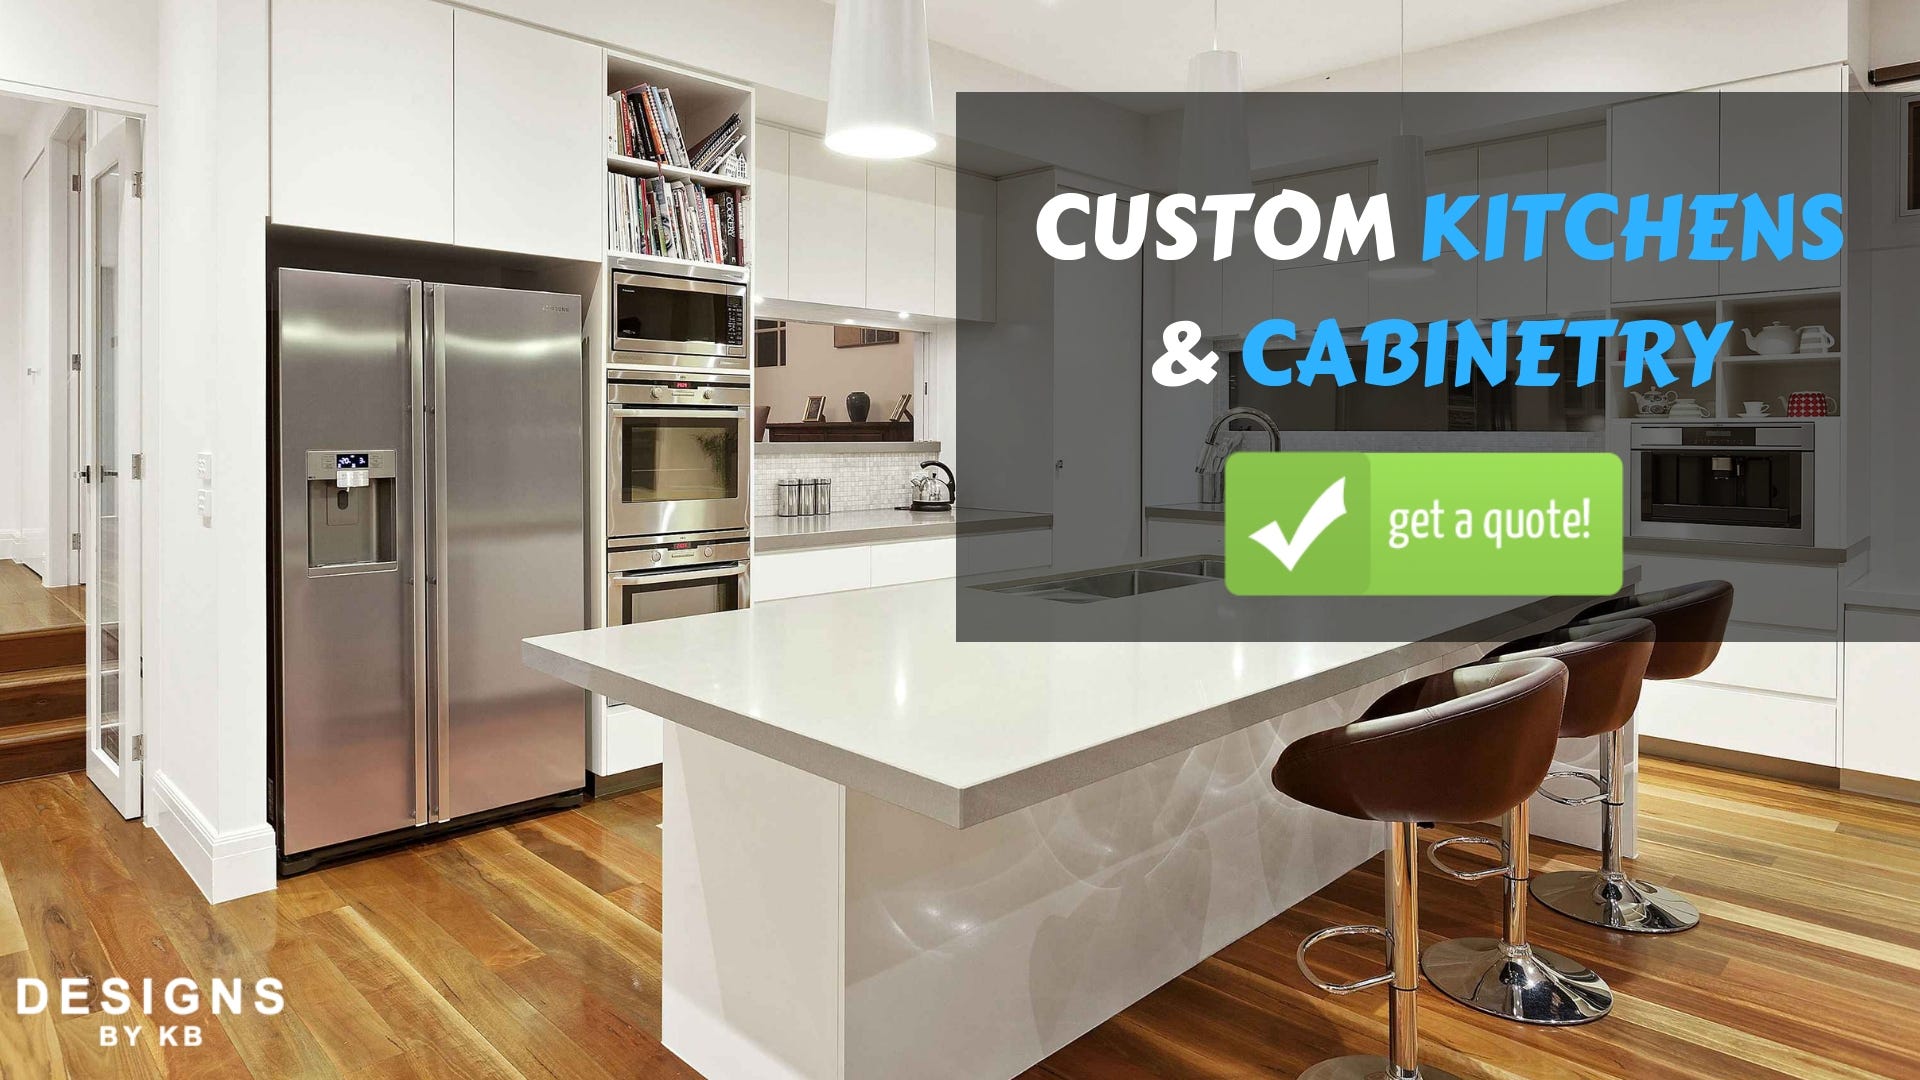 6 Benefits Of Hiring A Kitchen Contractor For Your Home Cabinets